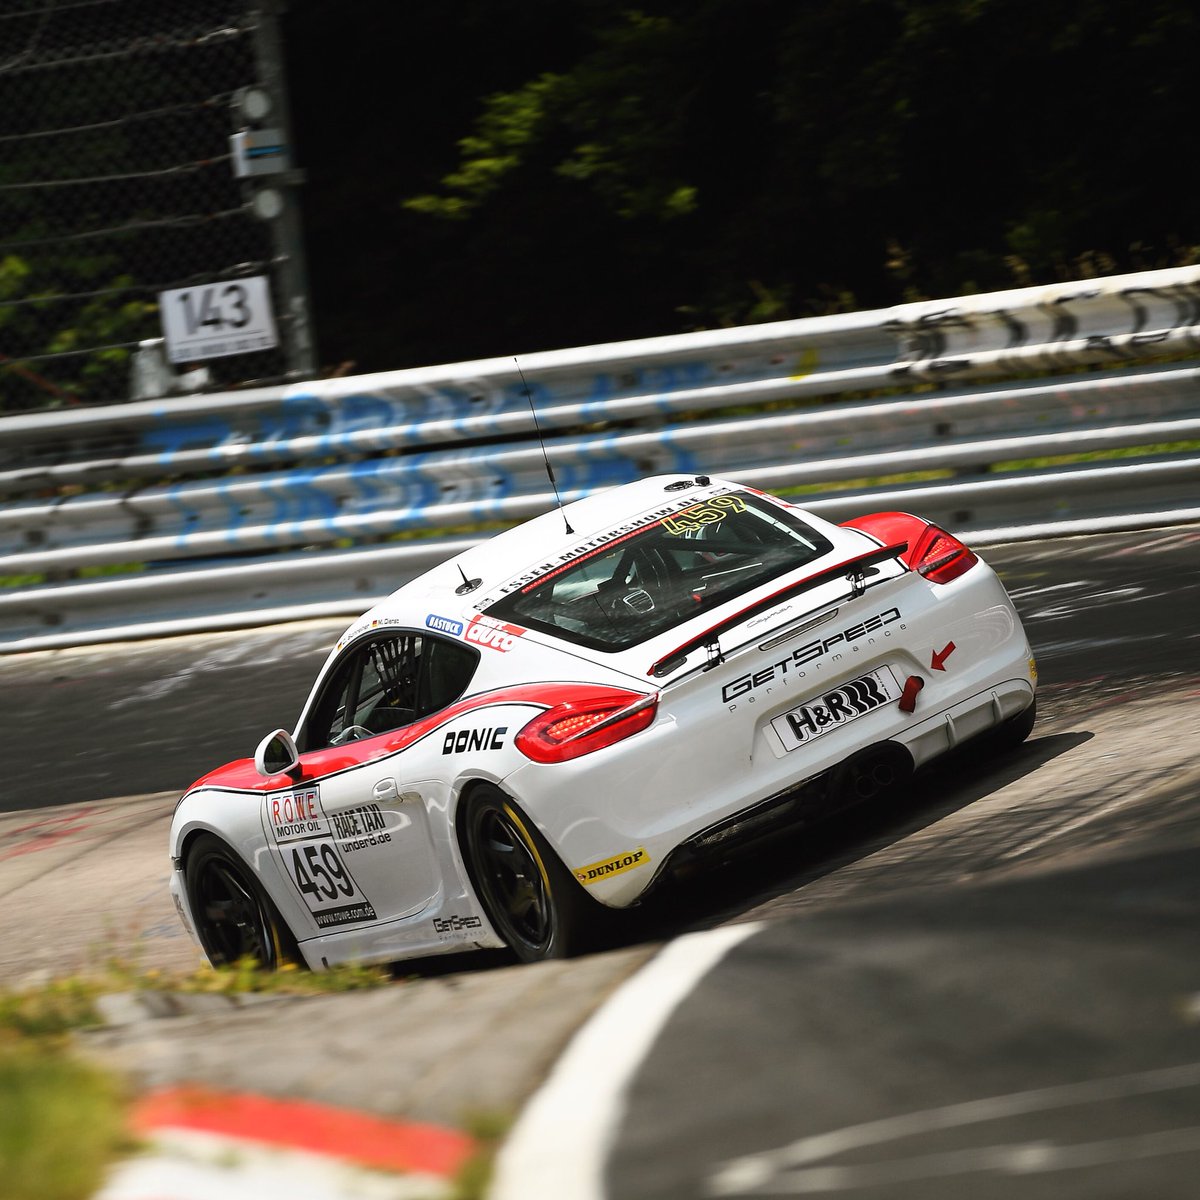 12 laps done with the little baby for the Permit A ☑️ @getspeed_performance @marvindienst #vln #cayman #nürburgringnordschleife 📸@gruppec_photography